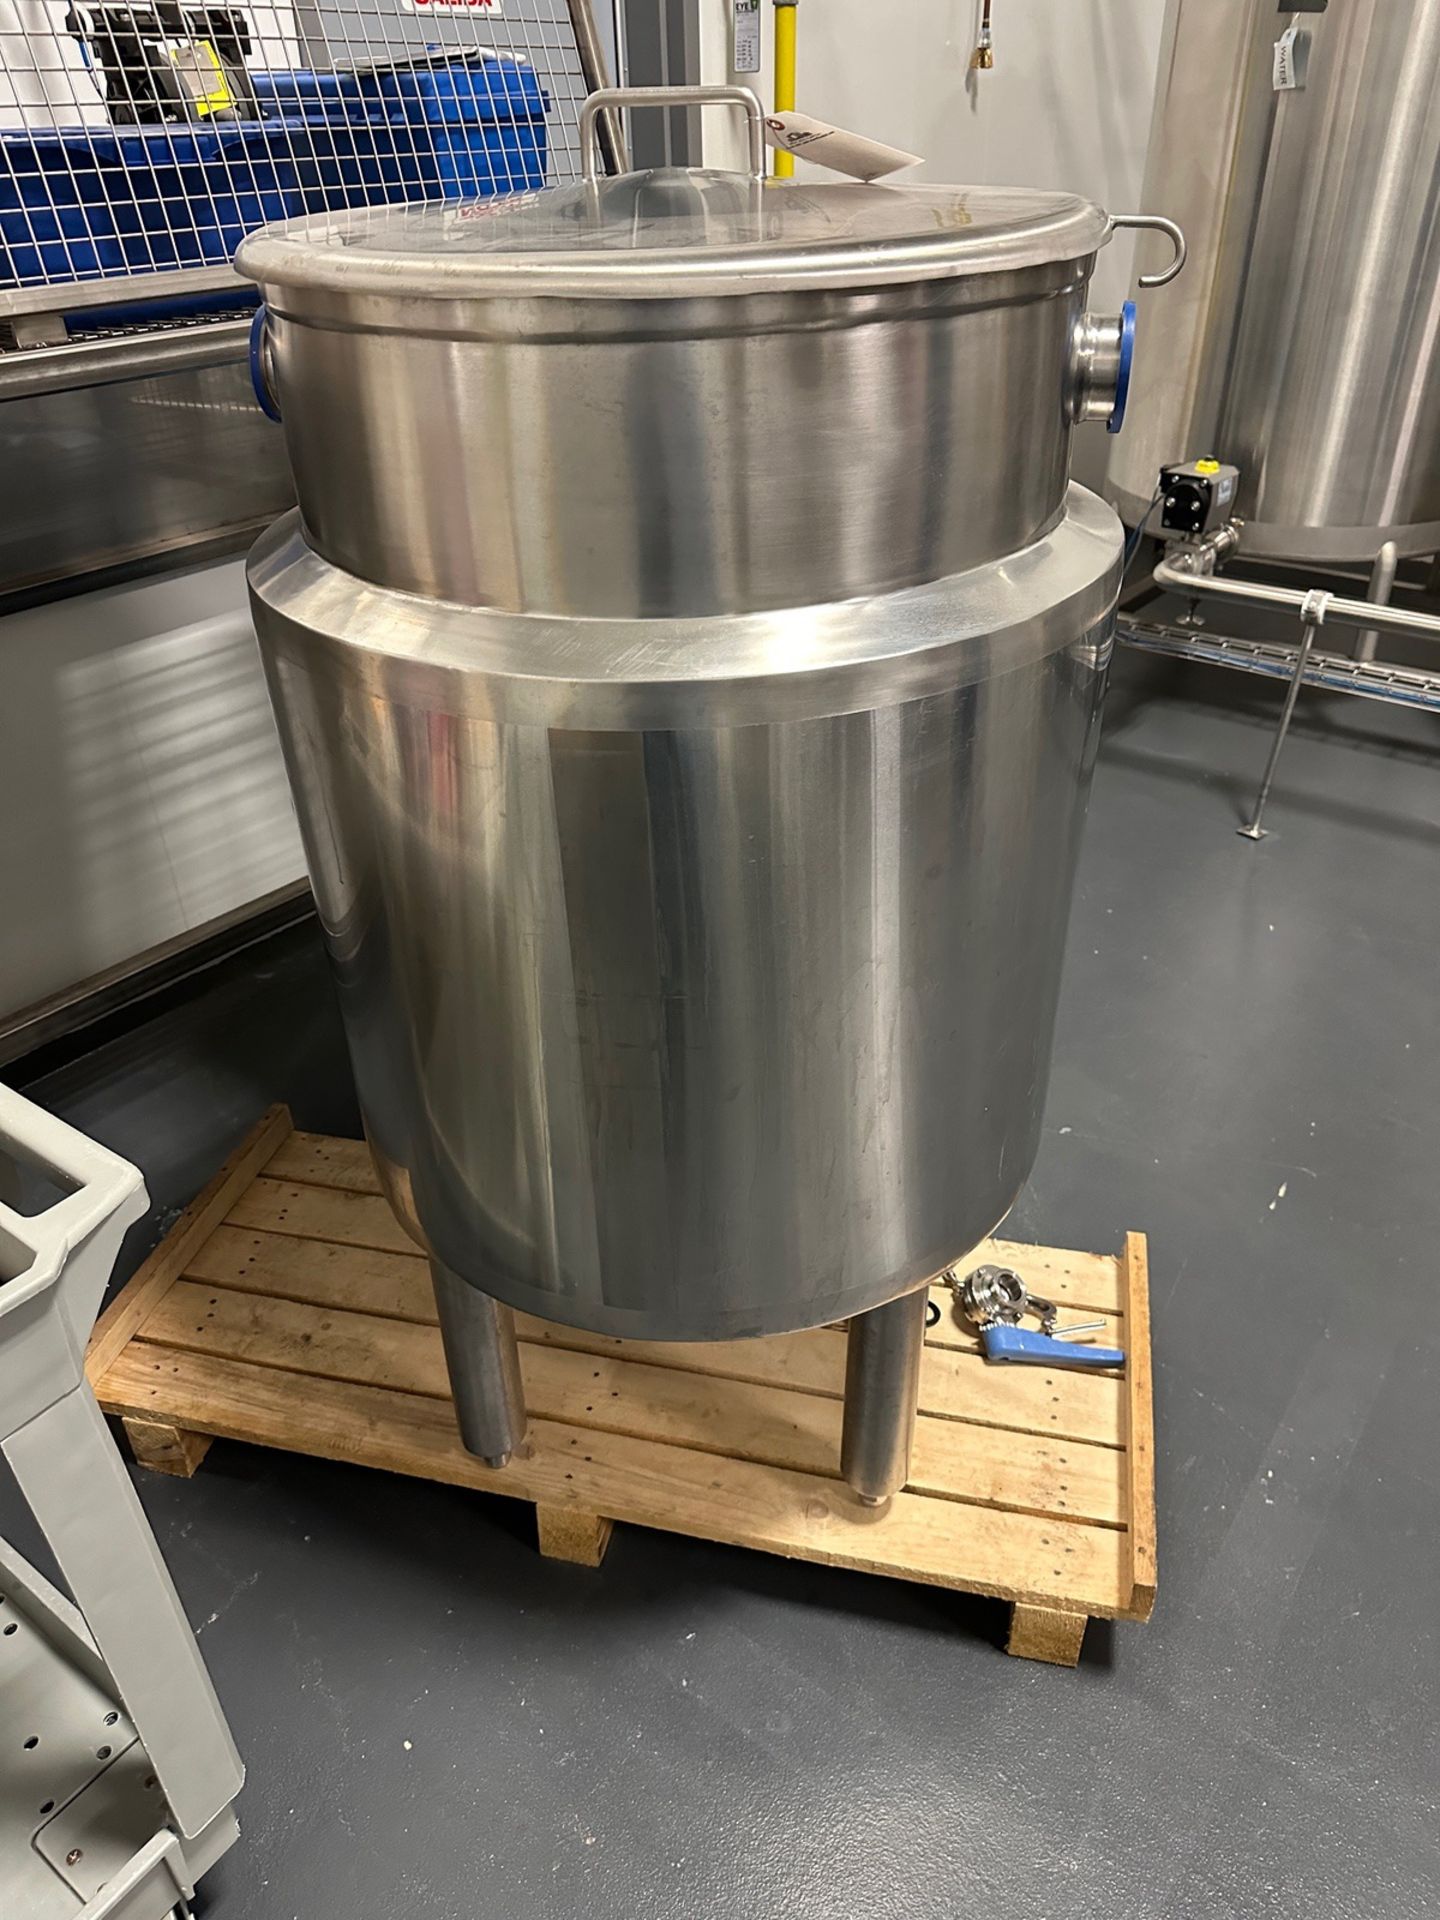 Anco 60 Gallon Stainless Steel Utility Tank - Model PT-OT, S/N 60-2014 (Approx. 30" | Rig Fee $100 - Image 2 of 4